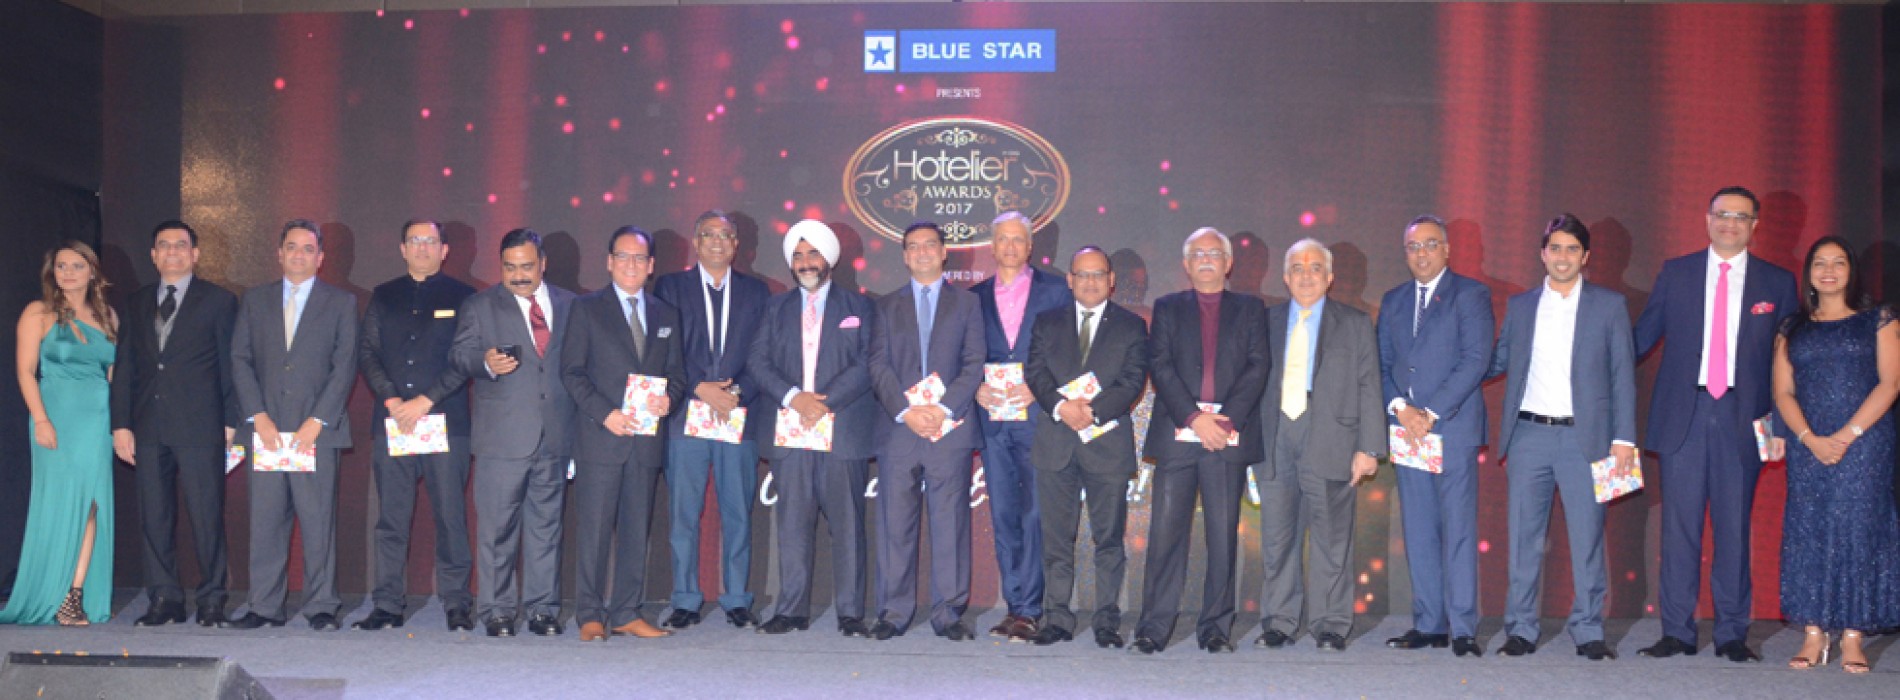 Berggruen Hotels achieves the double at Hotelier India Awards